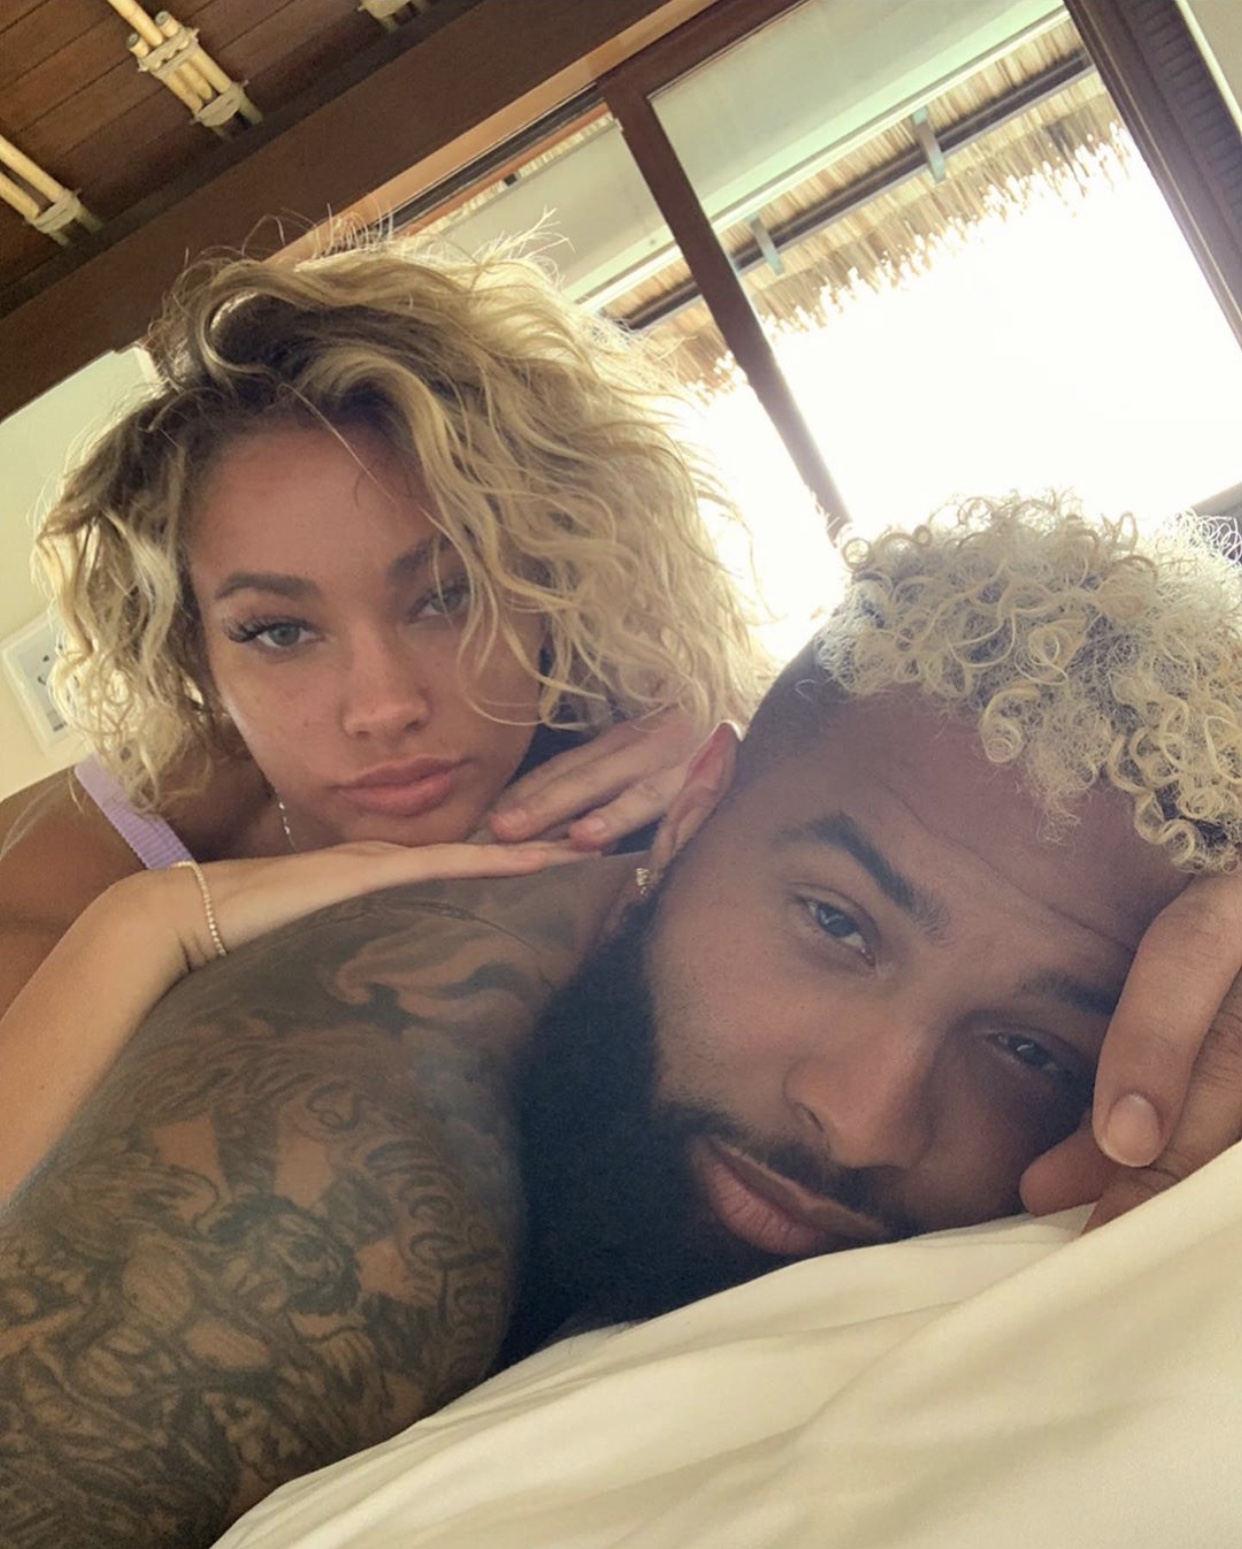 Details On Odell Beckham Jr Looking To Potentially Marry His Girlfriend